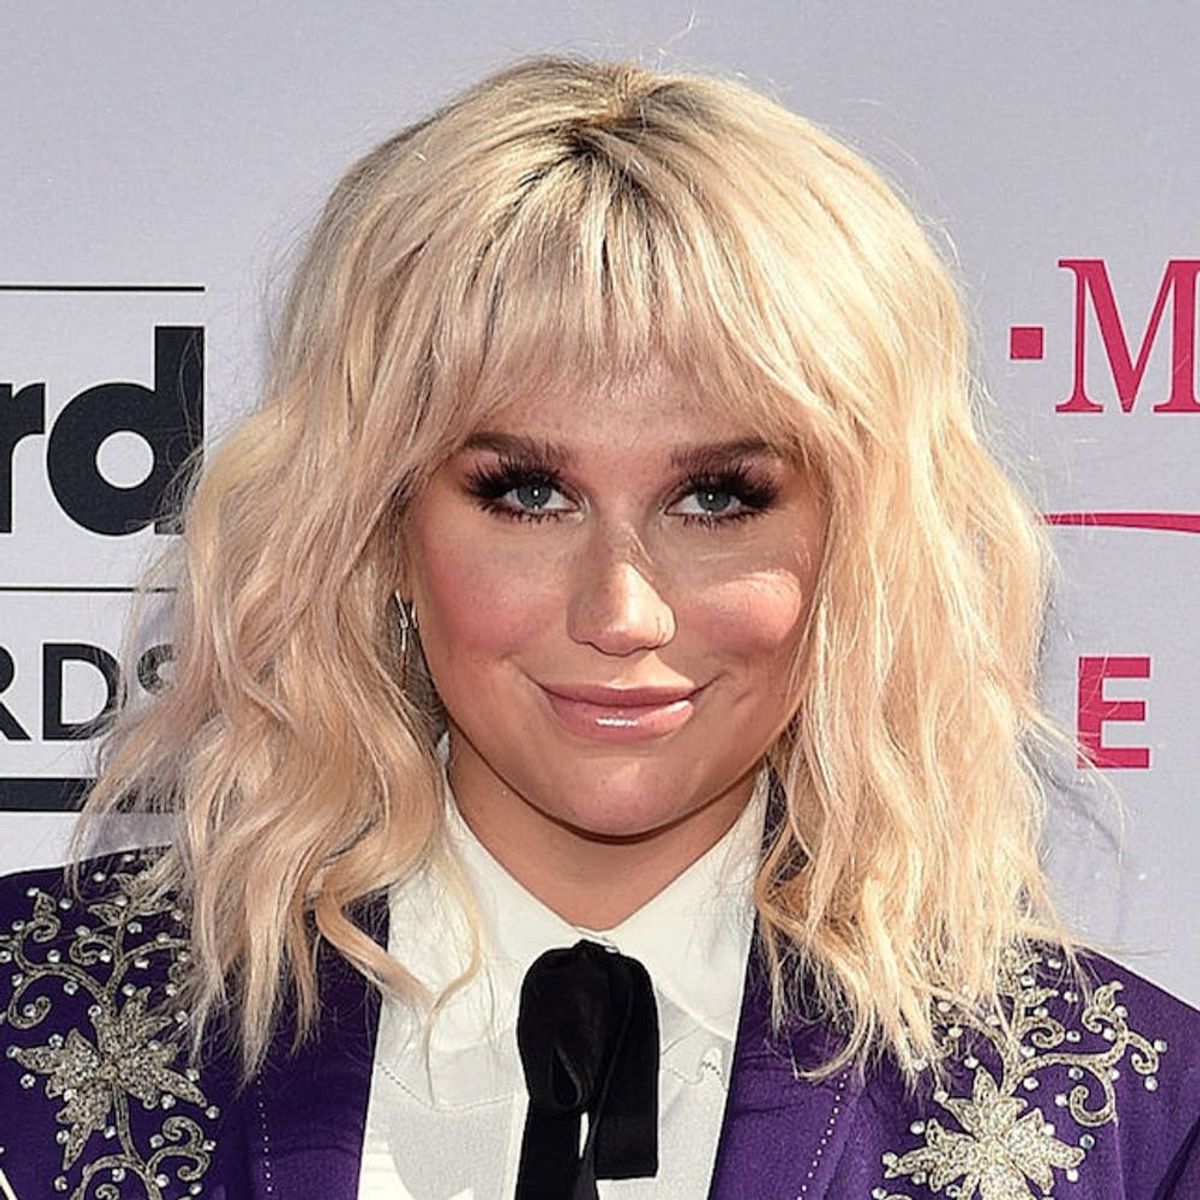 Morning Buzz! Kesha Just Made the Most Powerful Comeback With Her New Song “Praying” + More